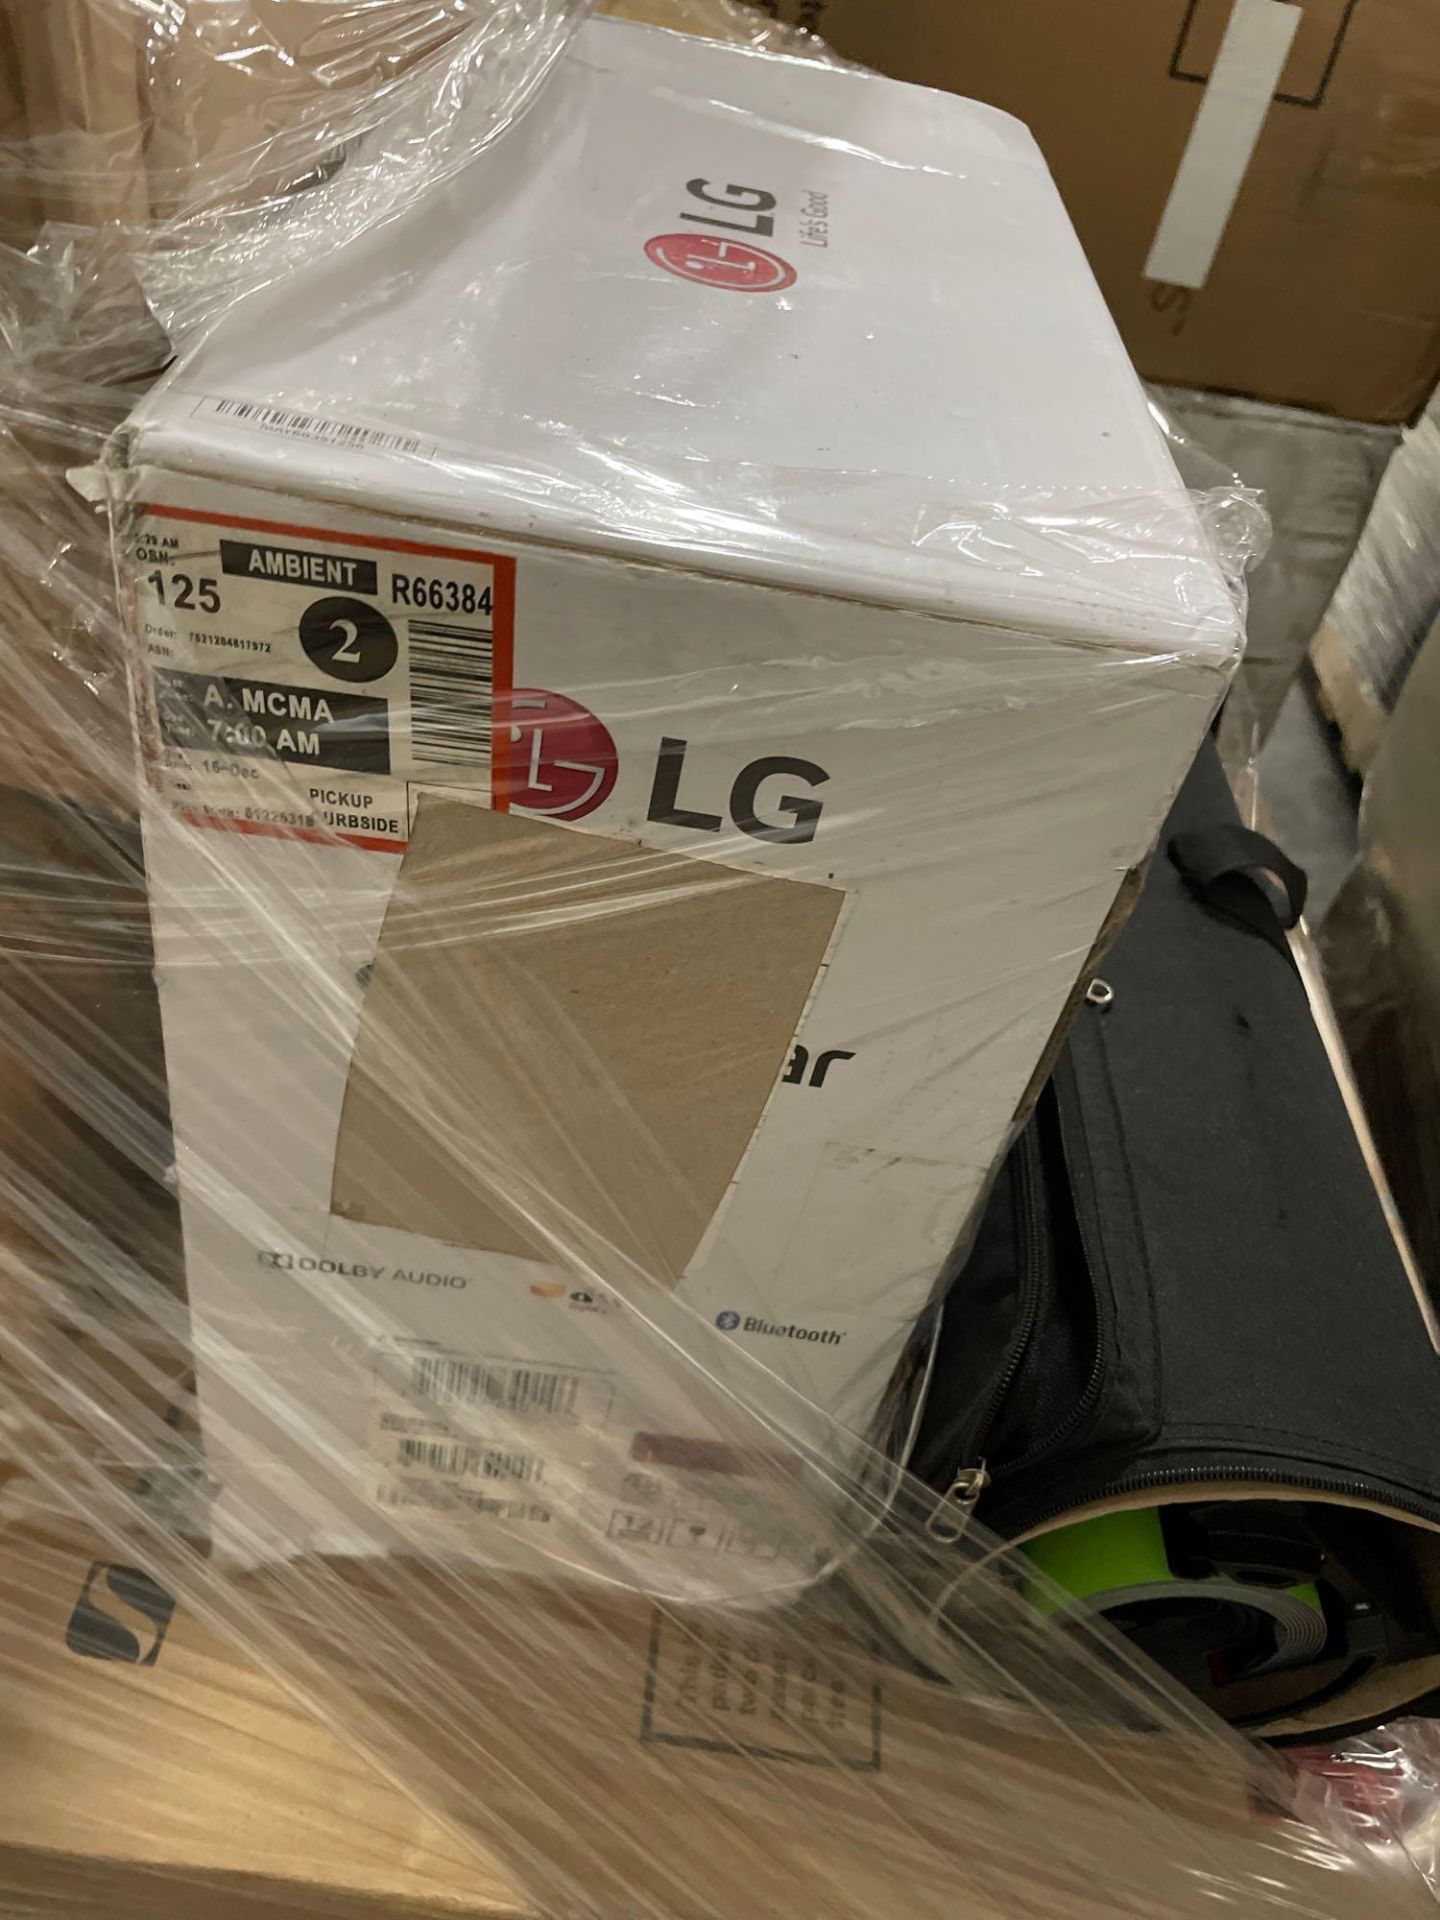 LG sound bar and more - Image 2 of 8